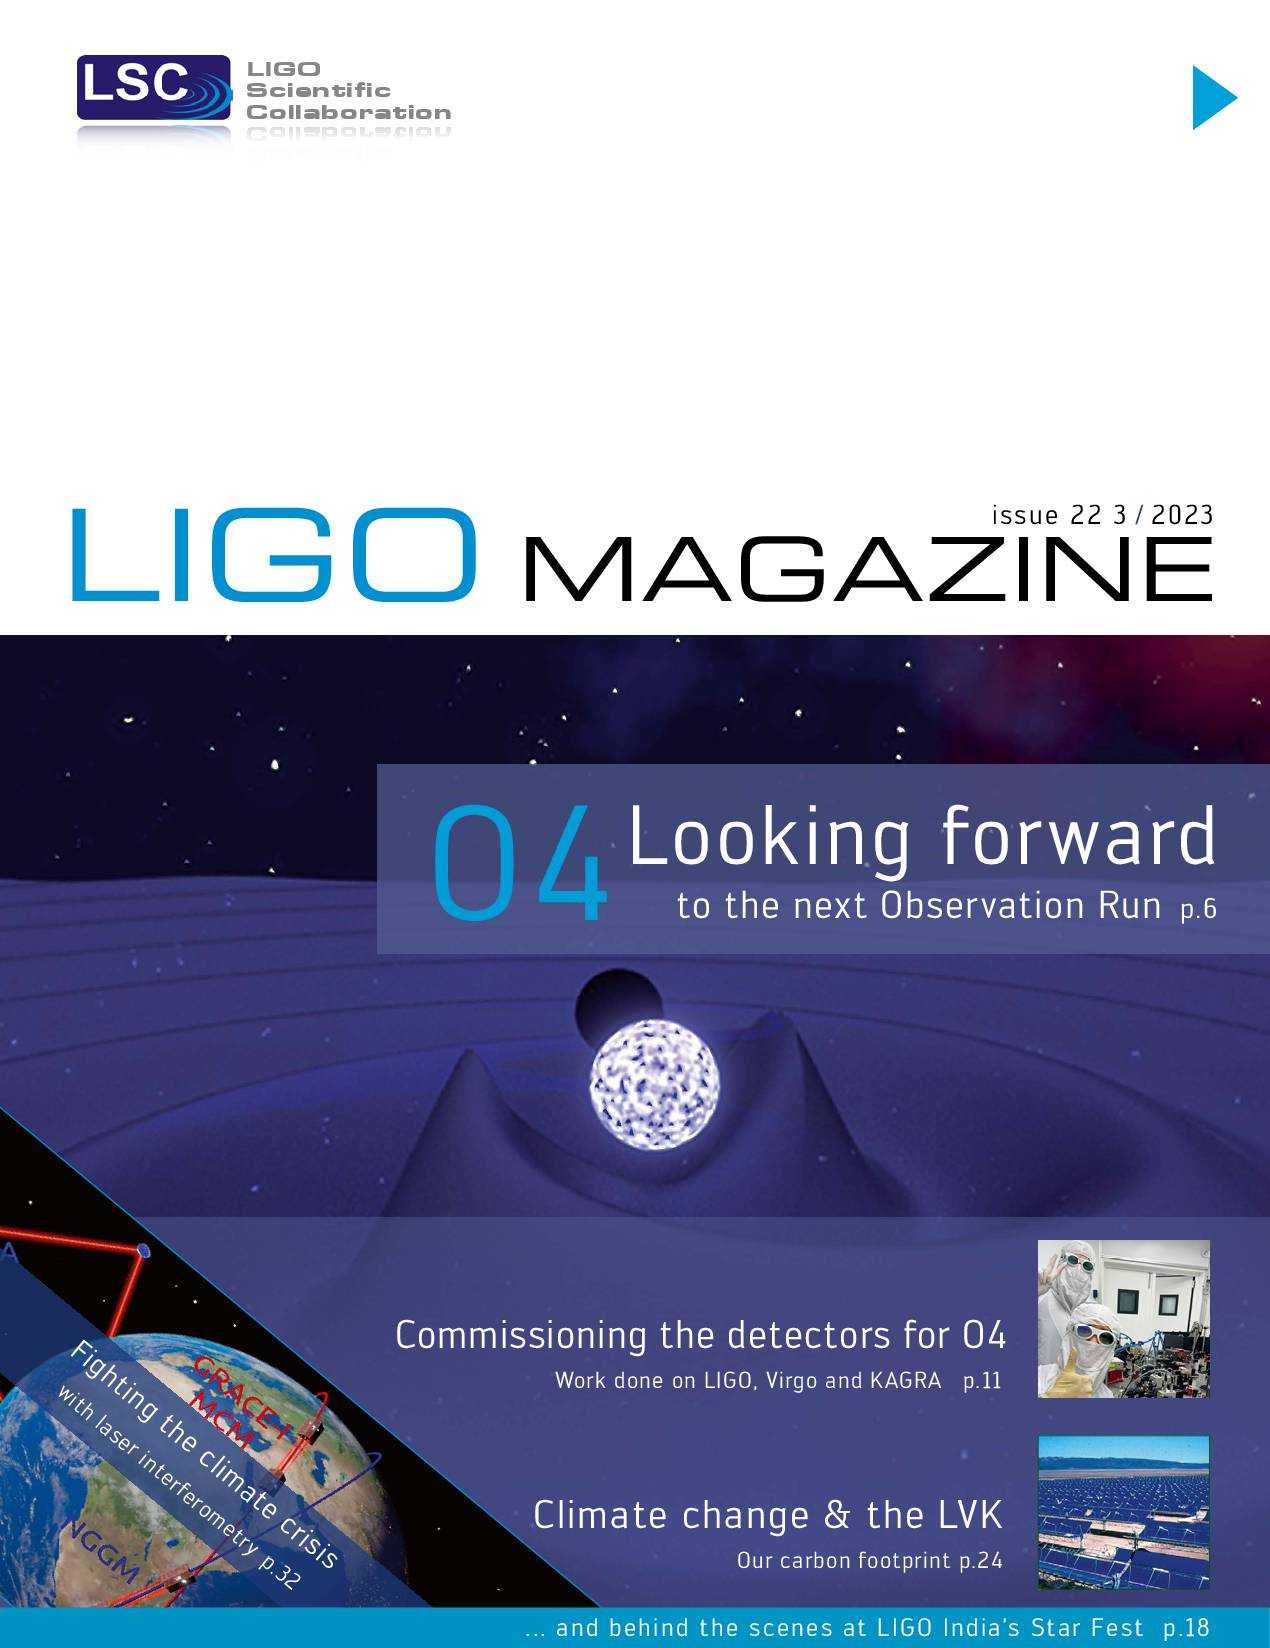 News-Image 6 of: New LIGO Magazine Issue 22 is out